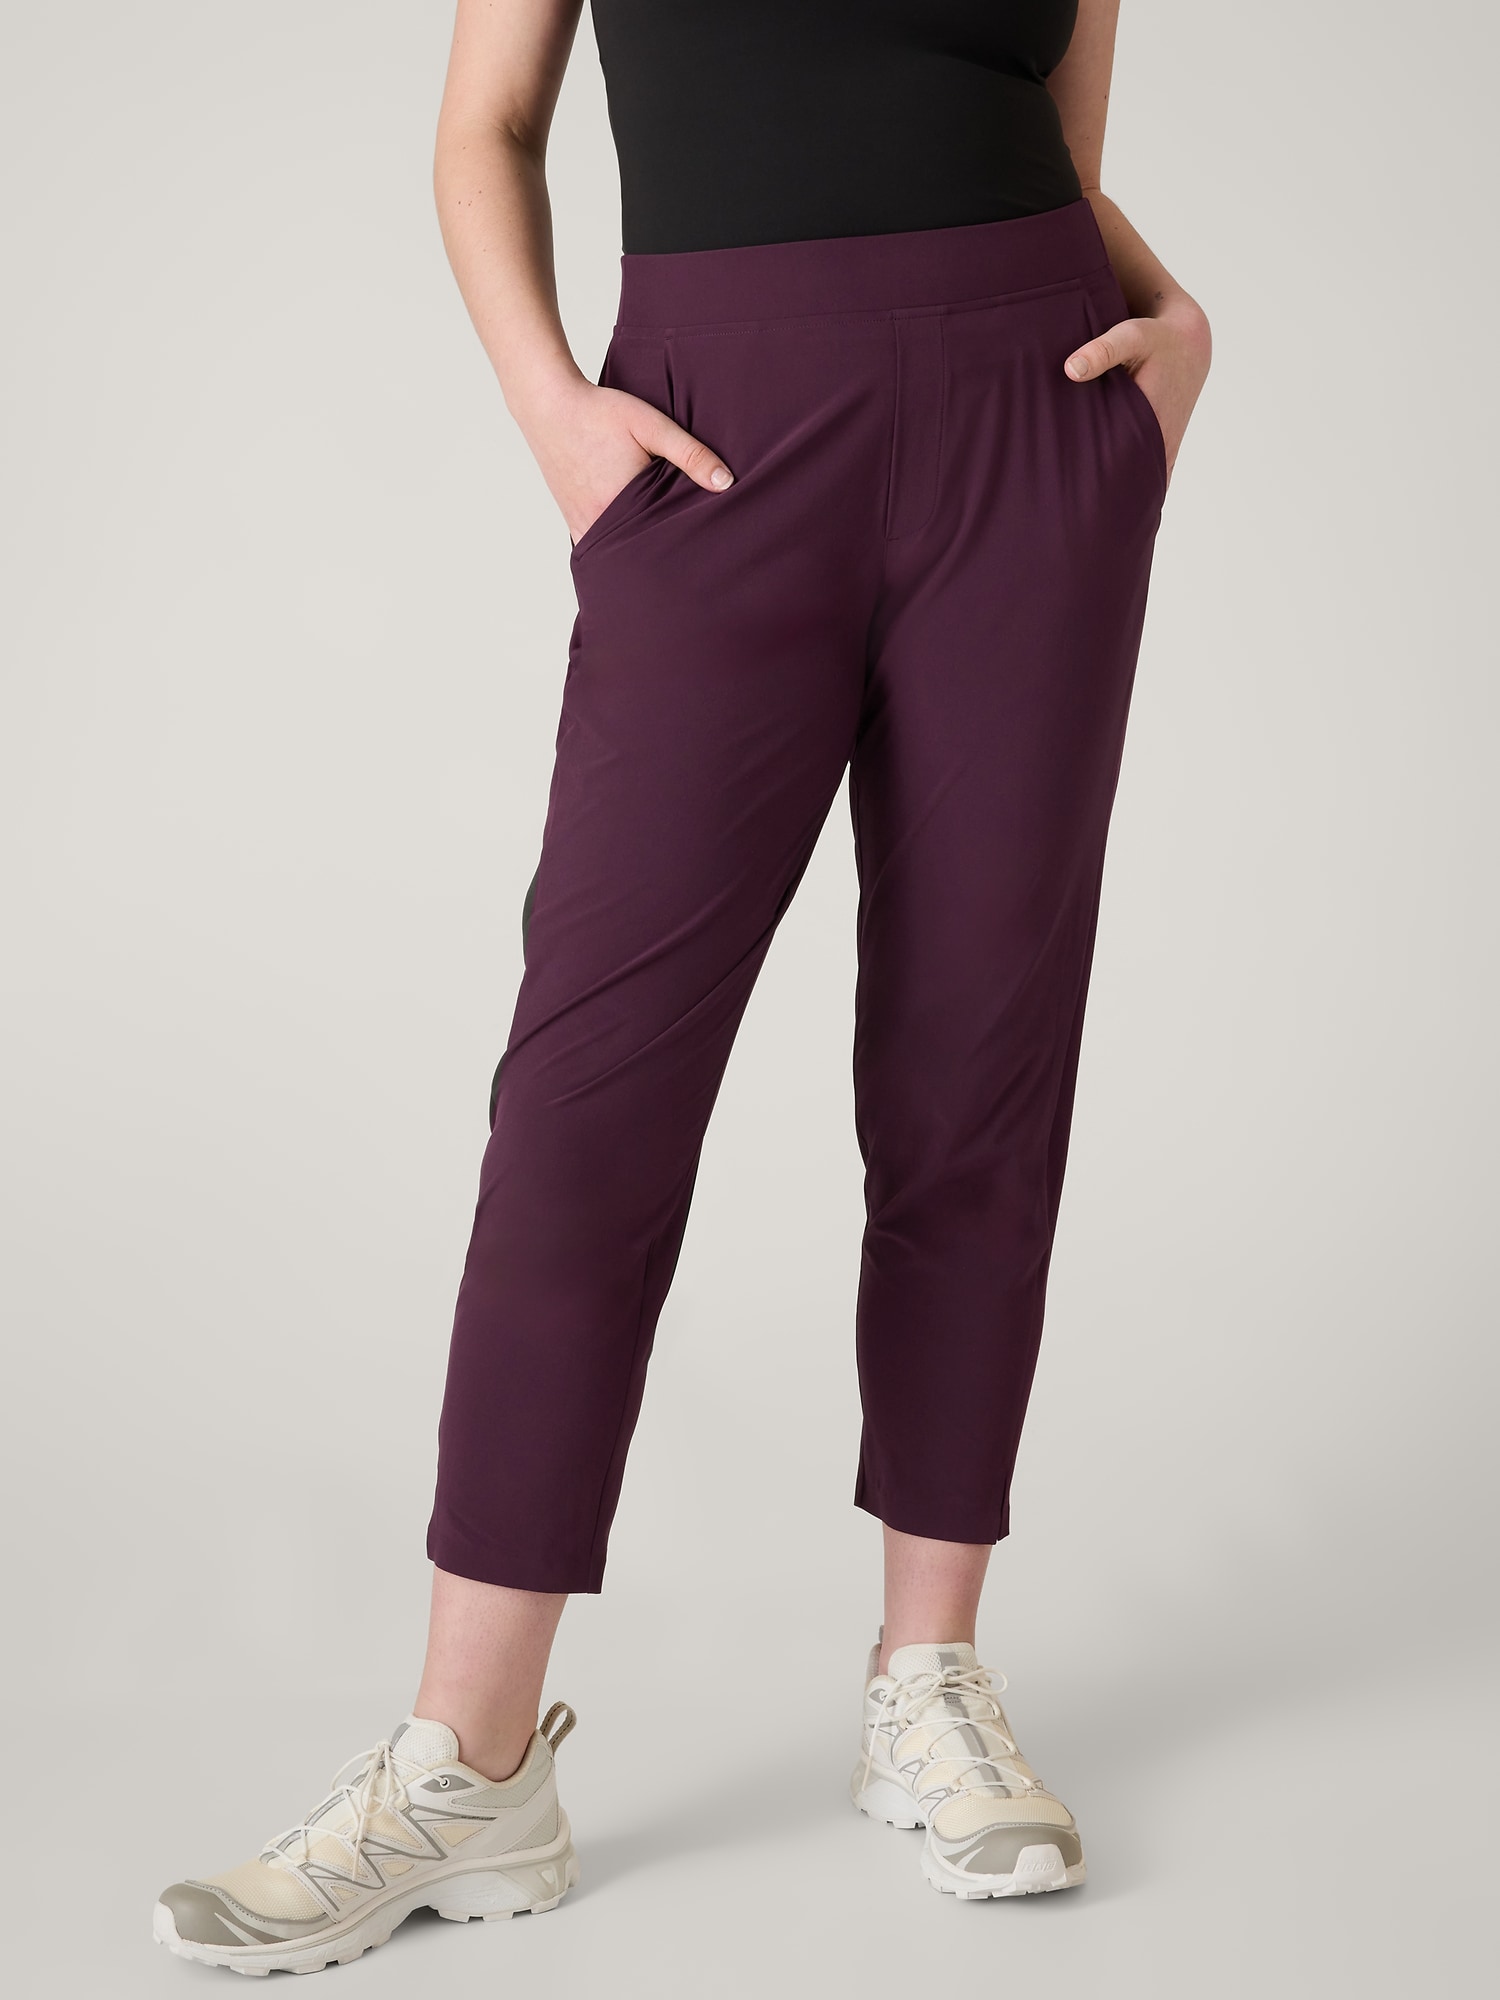 Athleta Brooklyn Ankle Pant Dupes Archives - Midlife Mama